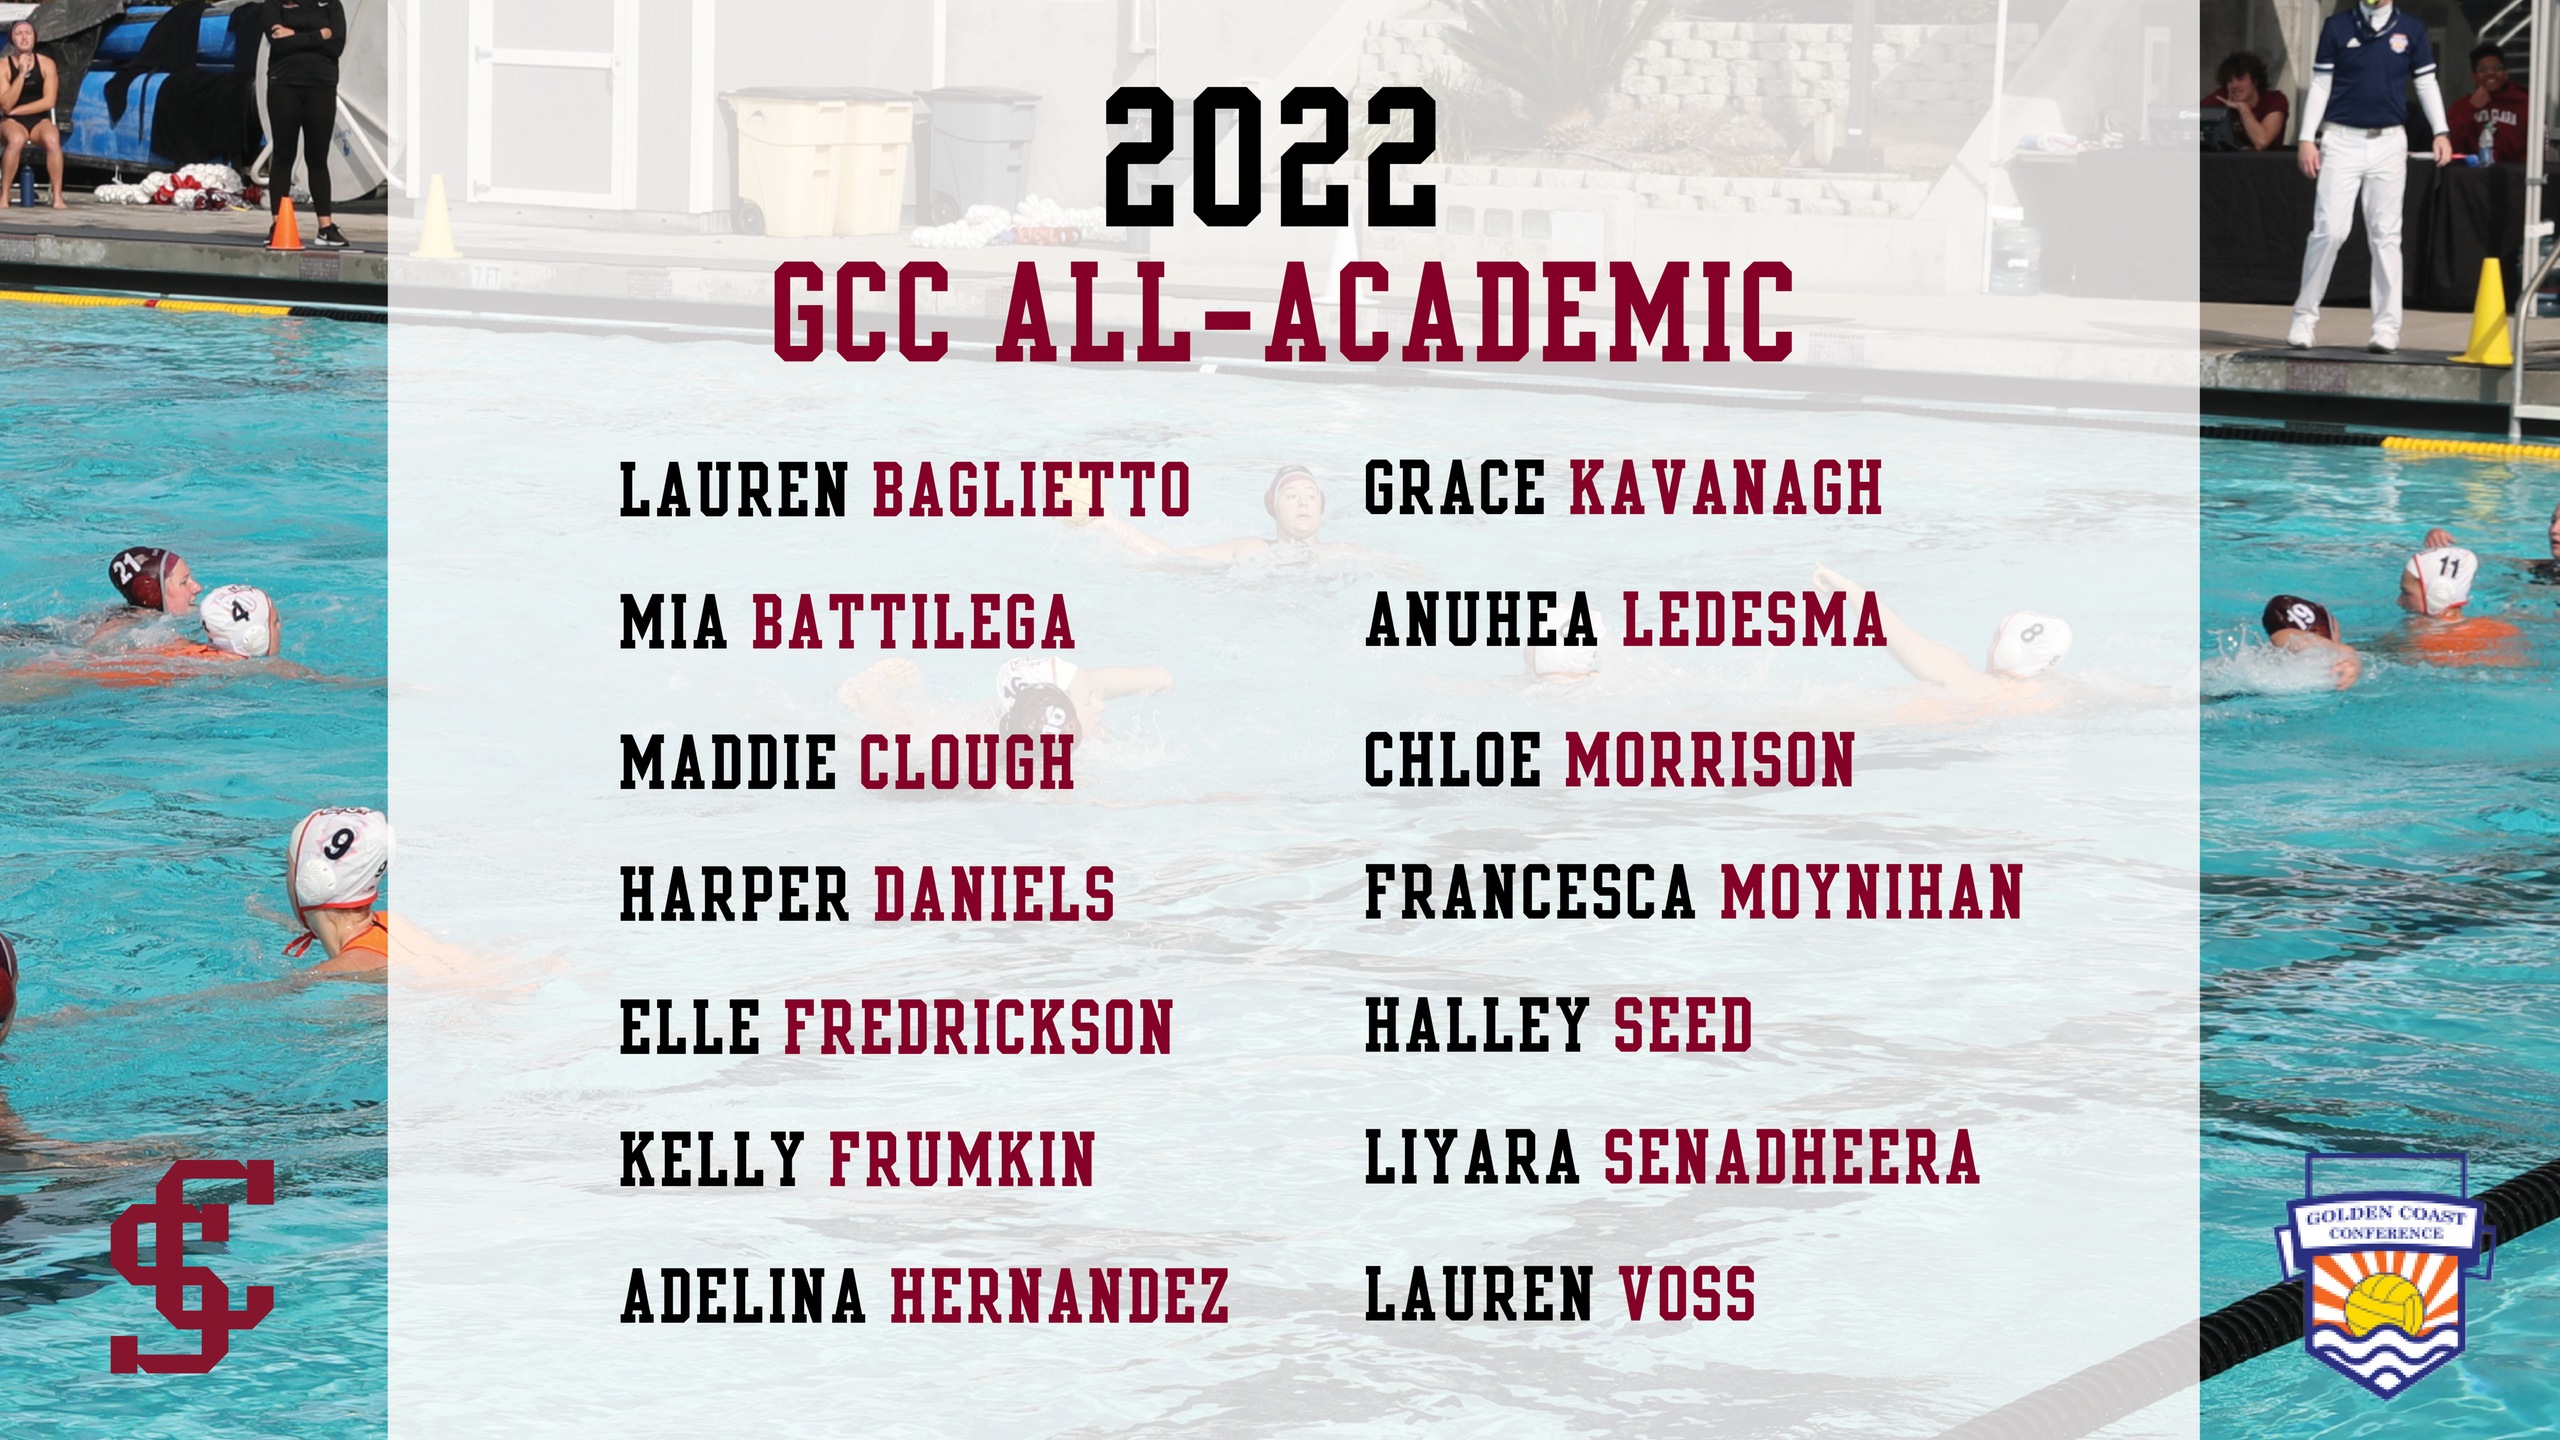 14 Women's Water Polo Athletes Honored On GCC All-Academic Team